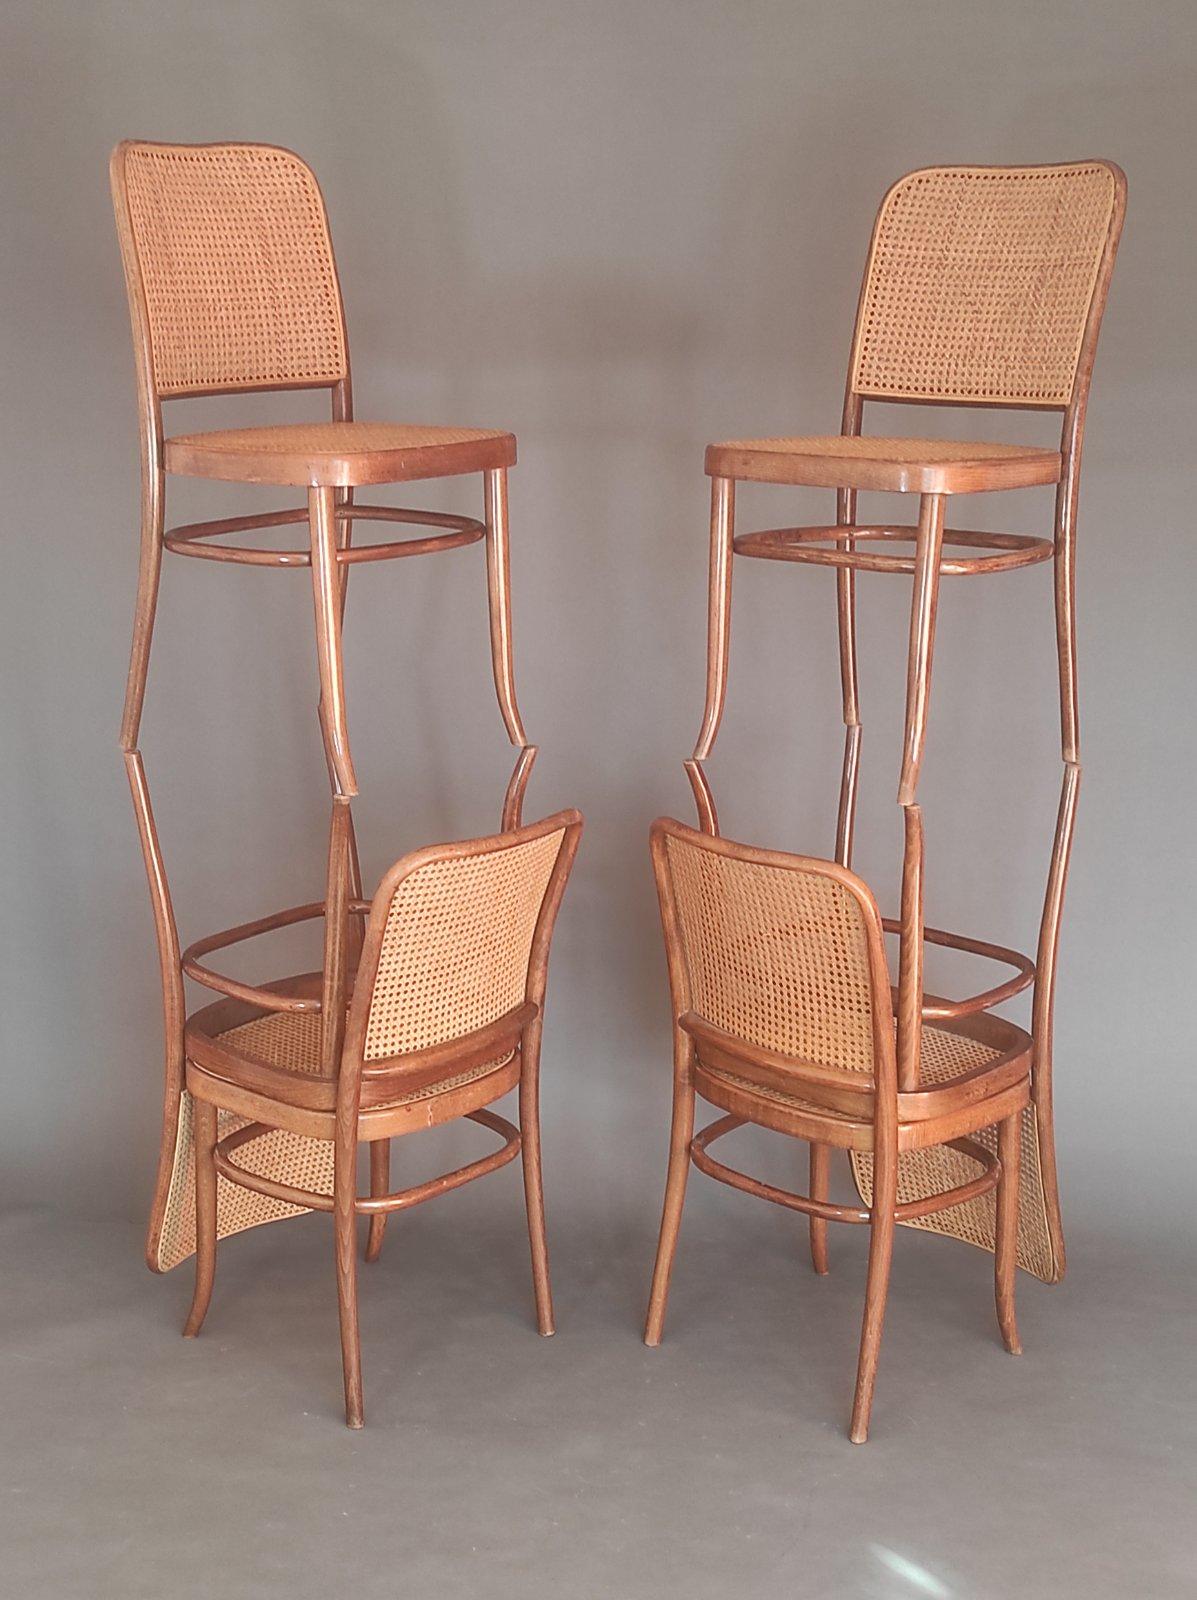 Set of Six Vintage Prague 811 Chair By Josef Hoffmann 1950s For Sale 5